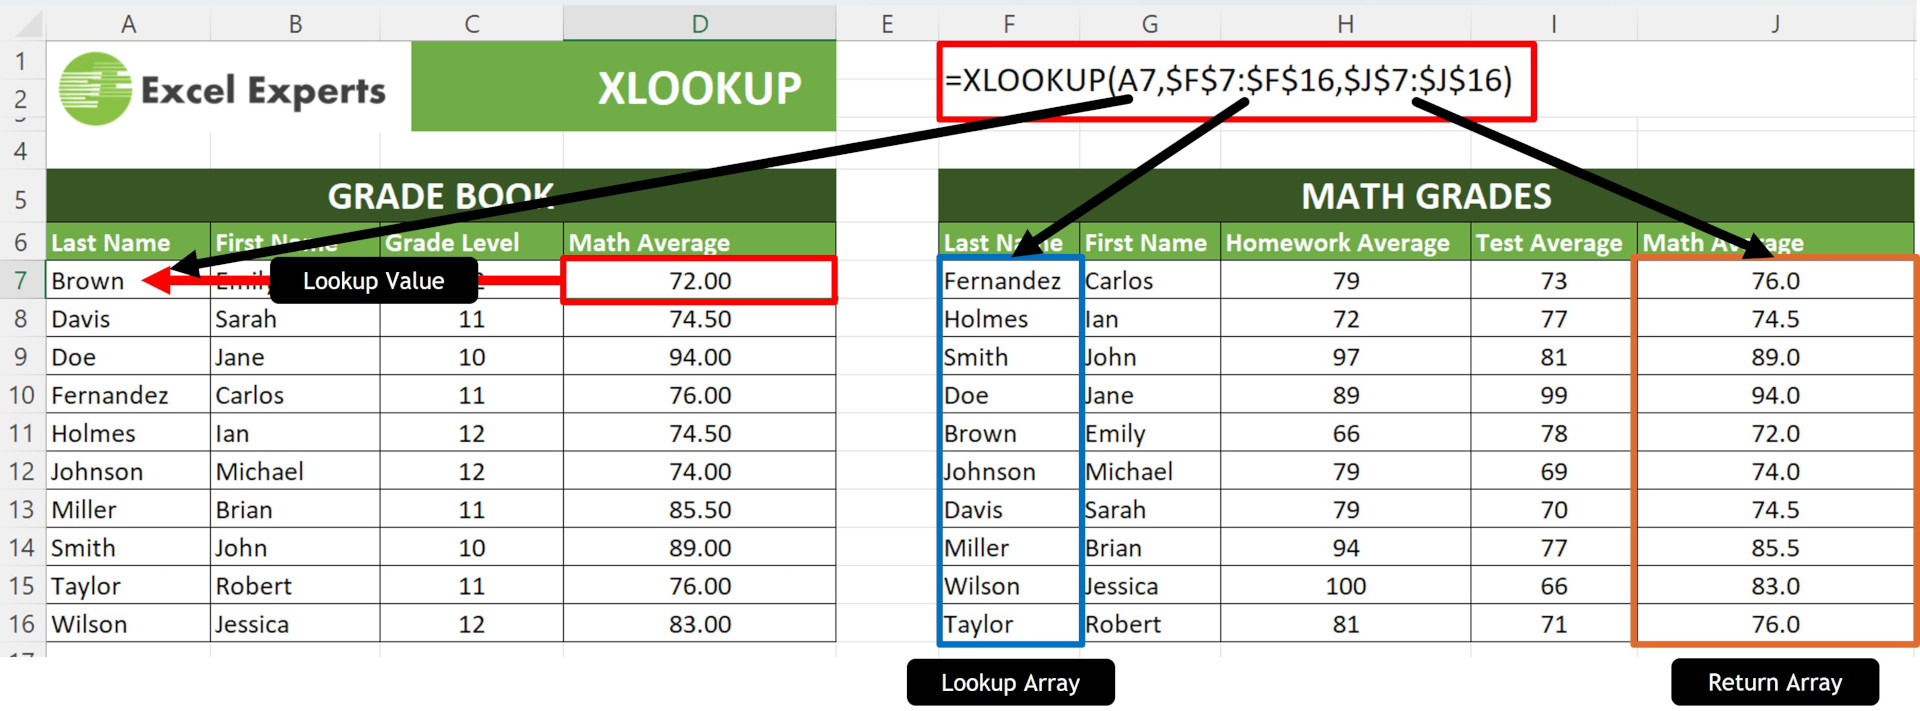 How the Microsoft Excel XLOOKUP function works